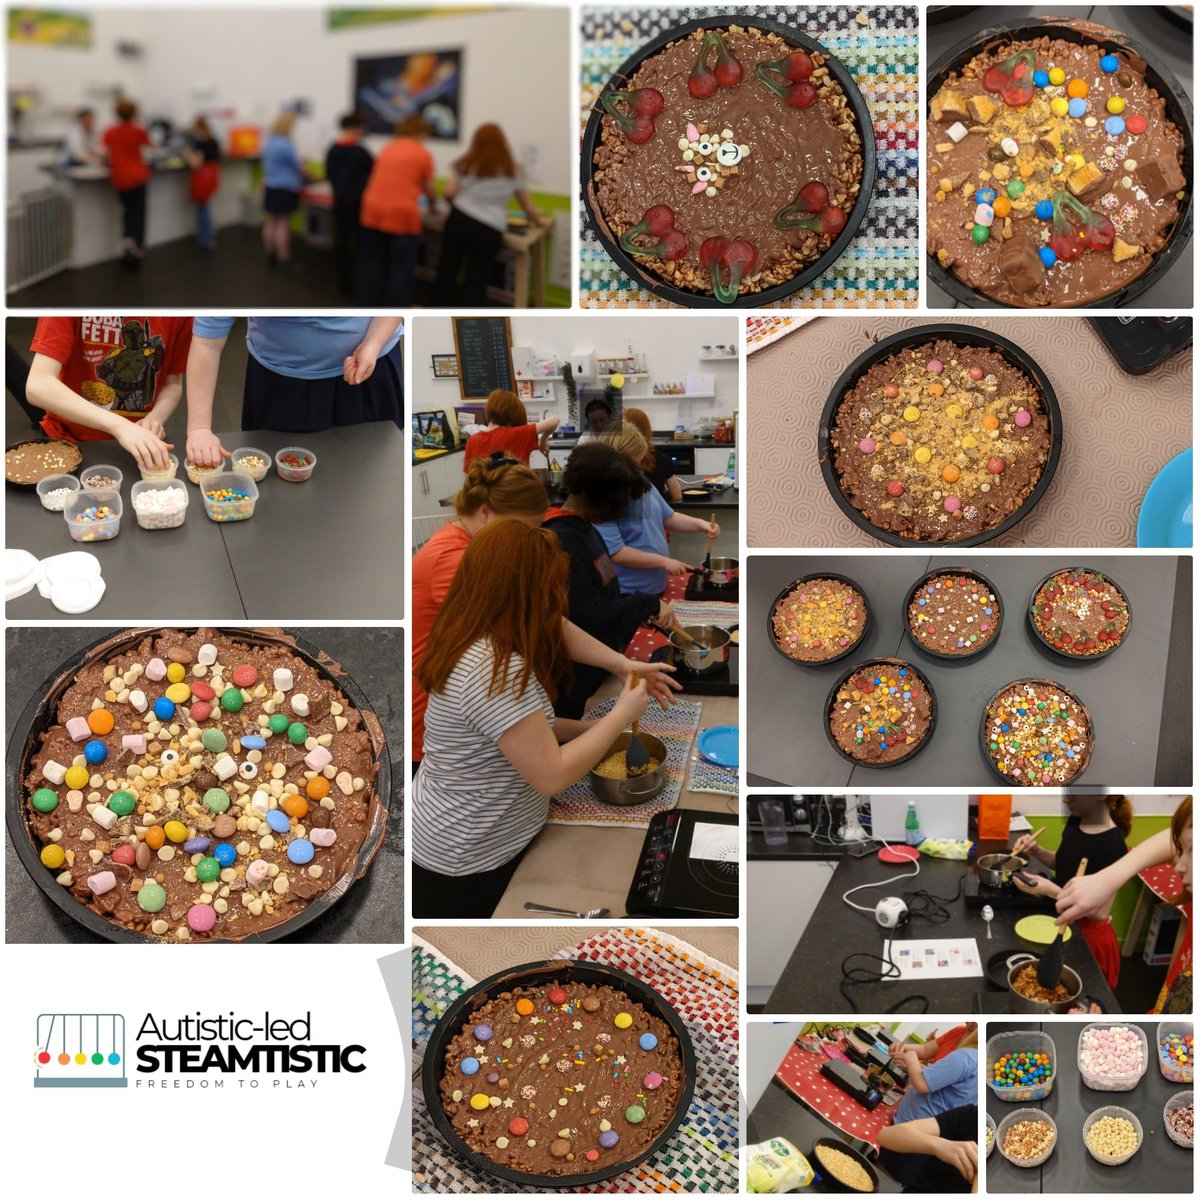 Life skills and #chocolate. Well done guys 👍🏼 #STEAM #STEM #autisticled Thank you to @spacesensory and @AutisticGirls_  @BSACommunities  #collaboration #communities #WeareCWVA